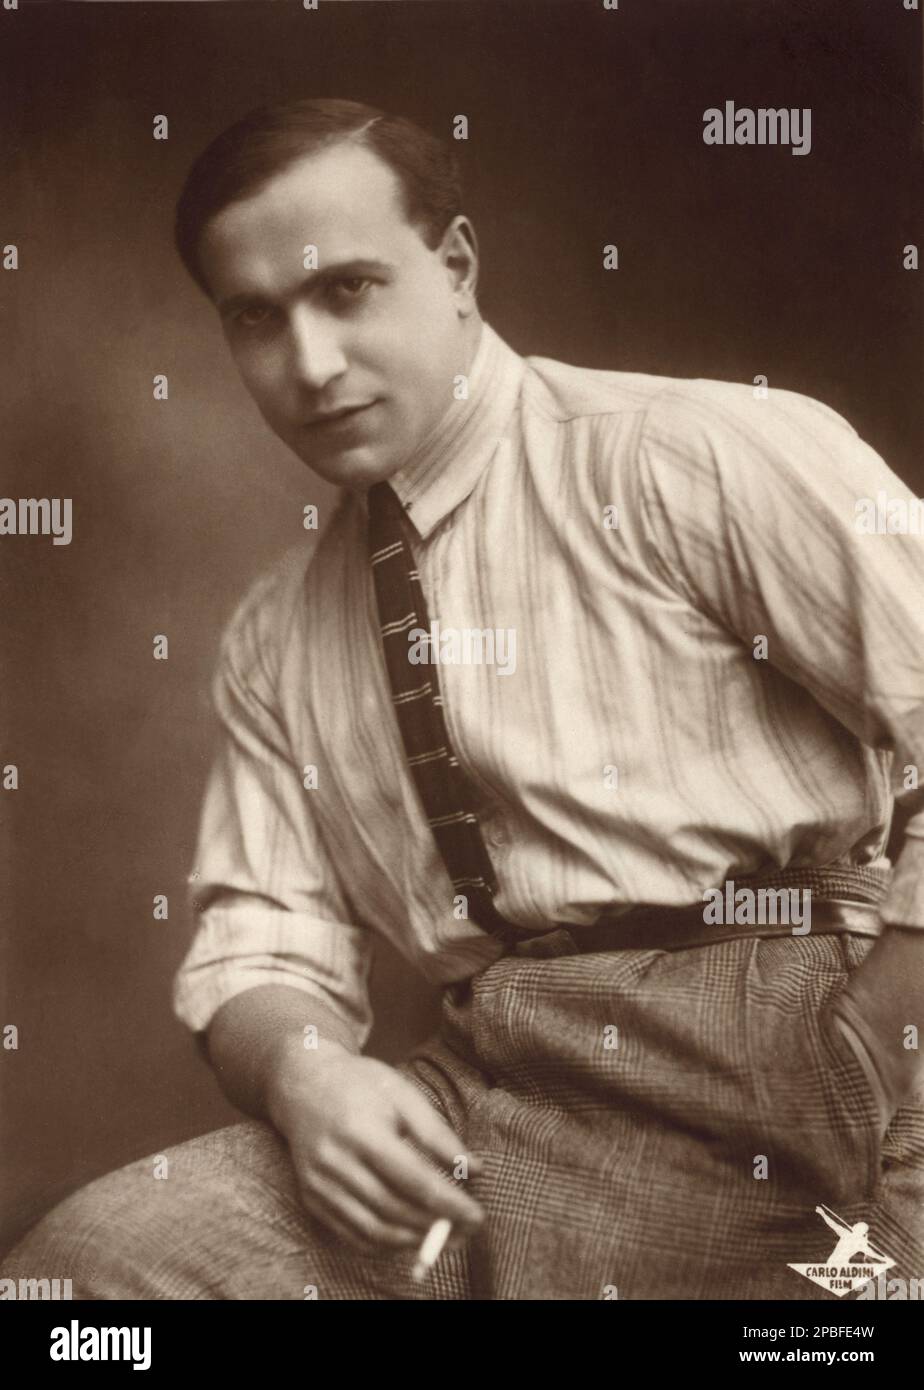 1925 c, GERMANY : The italian silent screen movie actor , producer and director  CARLO ALDINI ( 1894 - 1961 ).  Photo by Rembrandt , Berlin . In his youth he was a master of regional resources weight class in wrestling and boxing. 1920 he began as a film actor and was with his debut film LA 63-71-57, an action adventure with cars, even abroad. From 1923 in the German film success. His last film appearance was Aldini 1934. - CINEMA MUTO - attore - collar - colletto - cravatta - tie - ritratto - portrait  - uomo forzuto - sportman - sportivo - muscles - muscoli - muscoloso - fumo - smoke - sigar Stock Photo